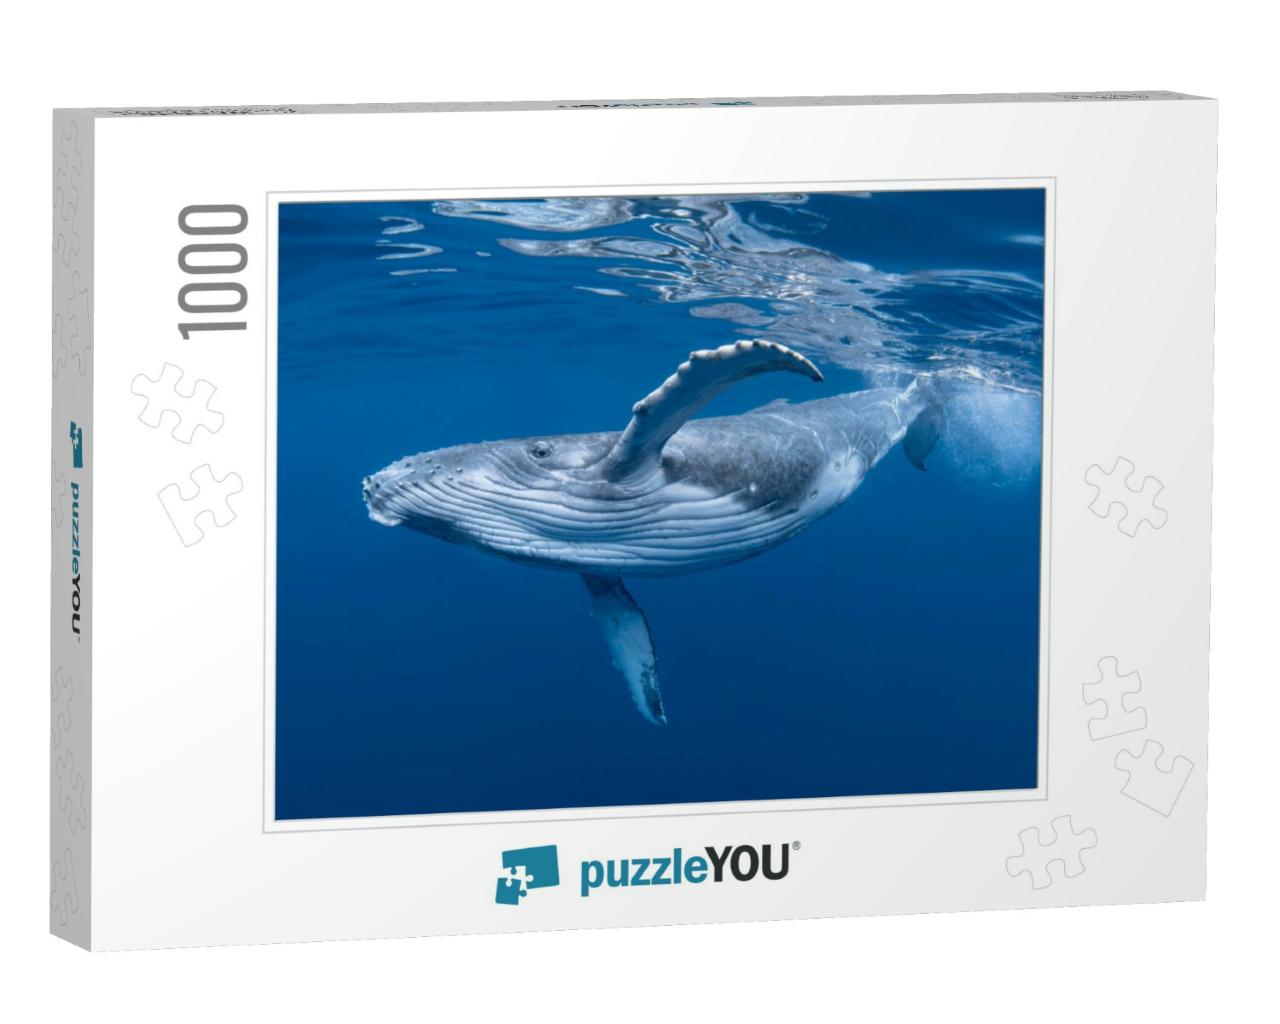 A Baby Humpback Whale Plays Near the Surface in Blue Wate... Jigsaw Puzzle with 1000 pieces